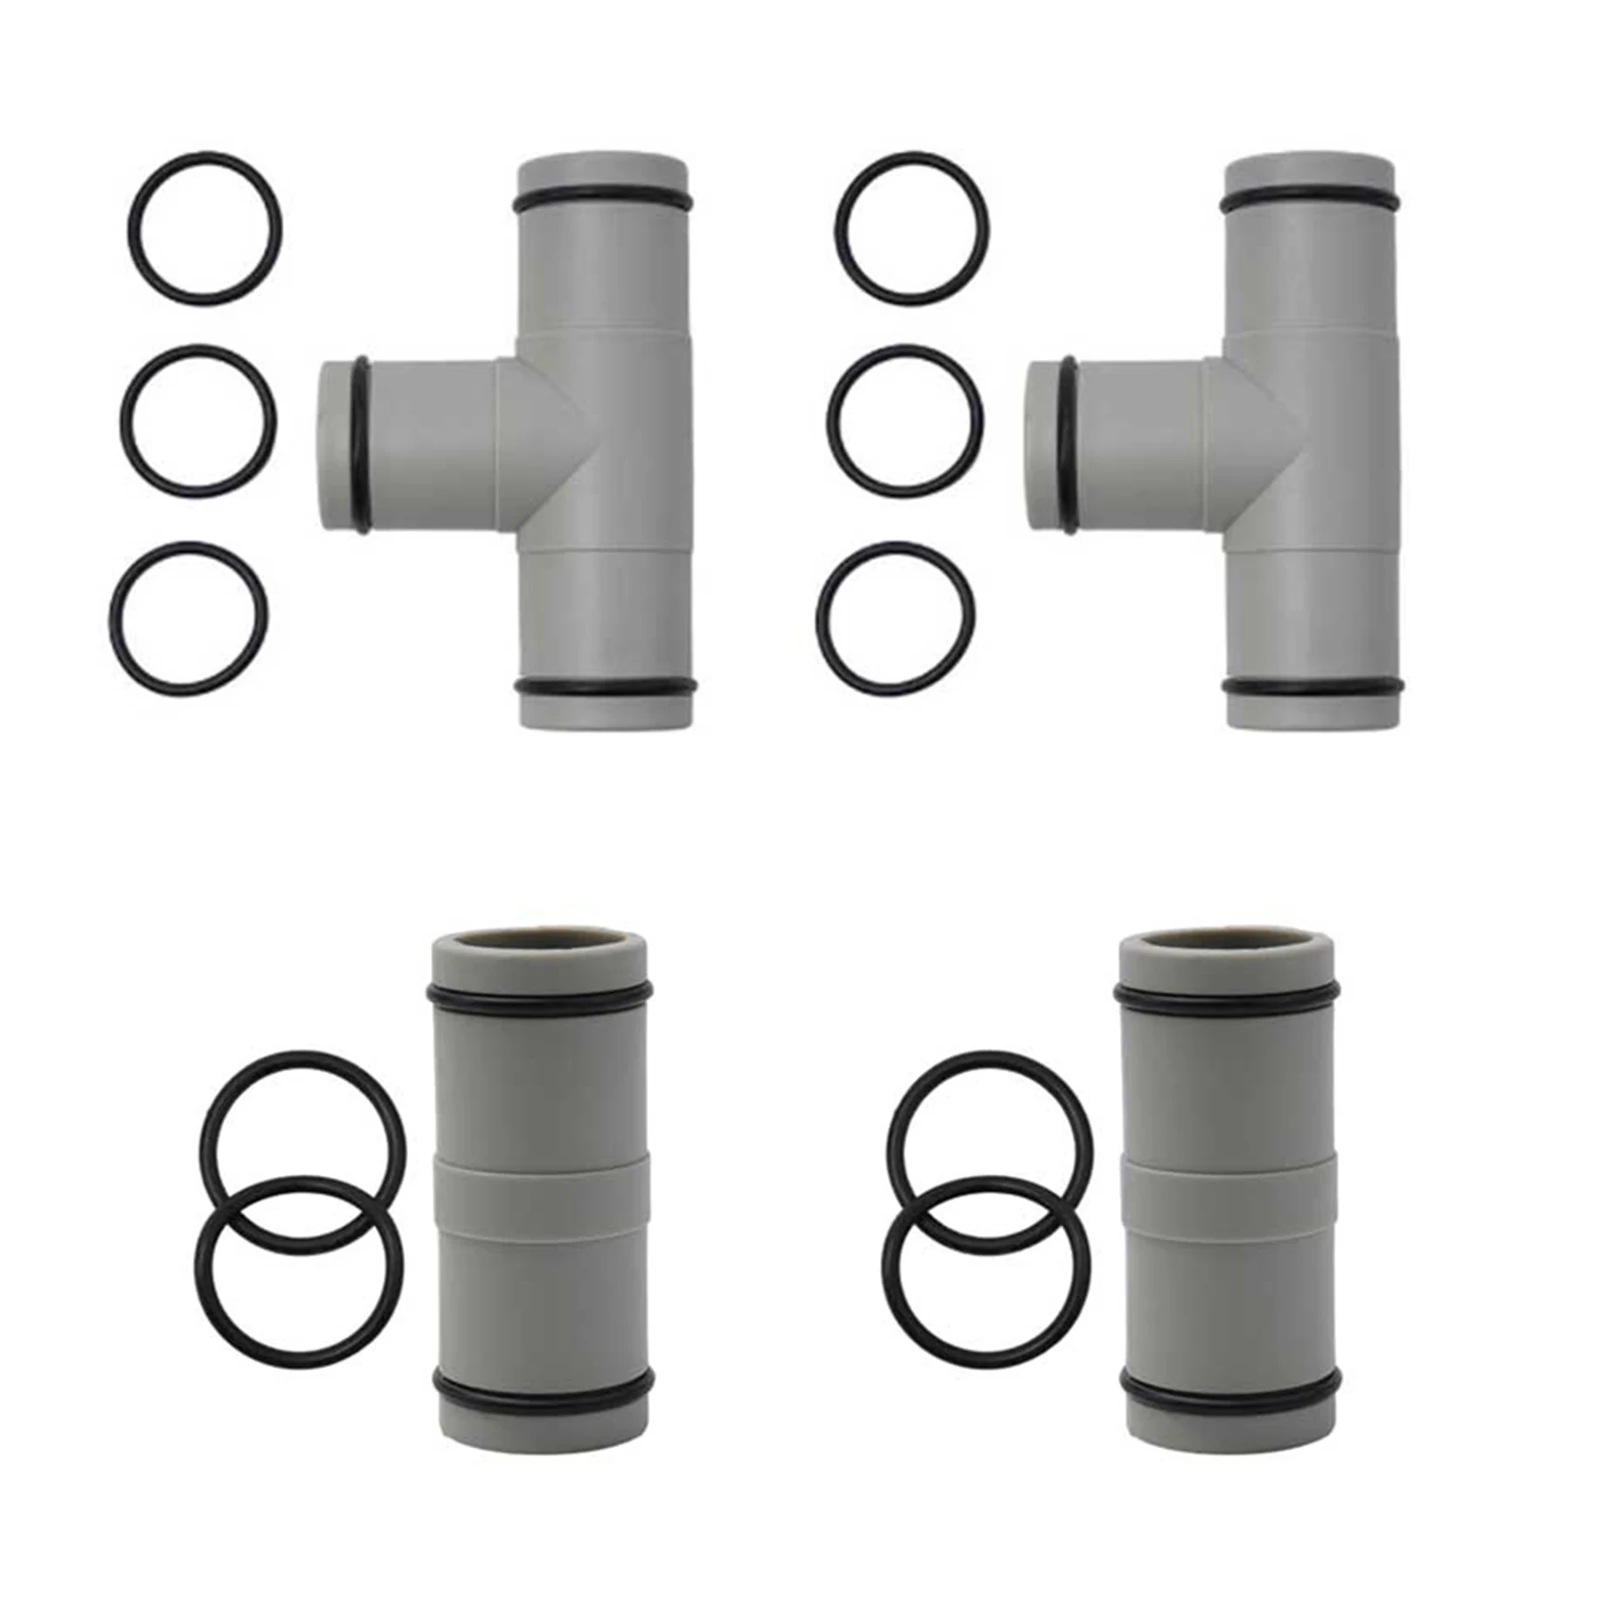 

Universal Pool Hose Connector Set for Swimming Pool Durable PP Material Leak Proof T Joint and Straight Connectors